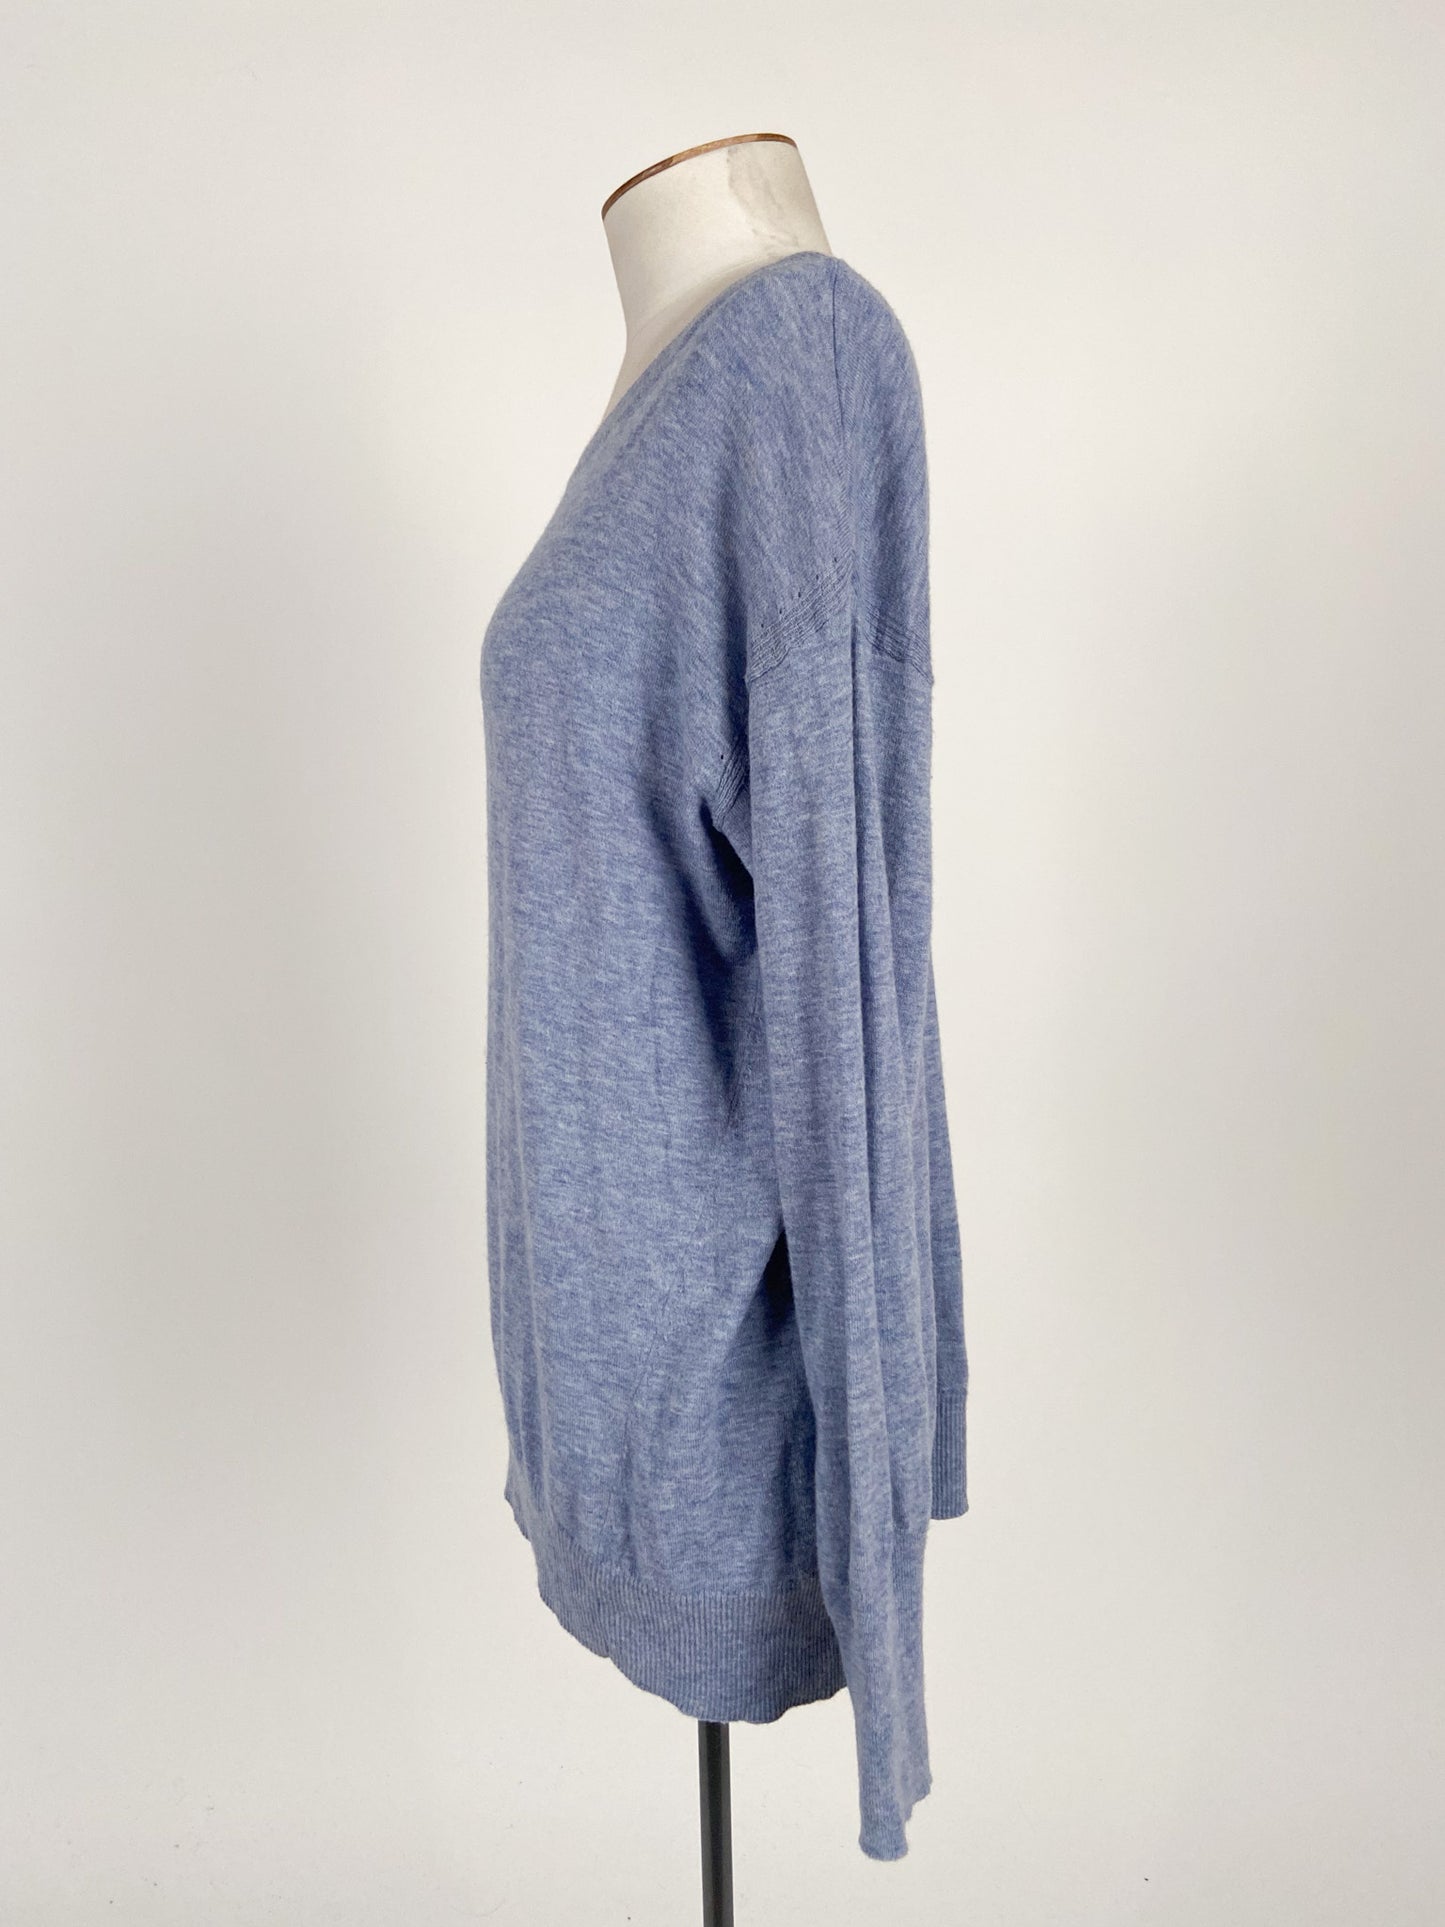 Country Road | Blue Casual Jumper | Size XS